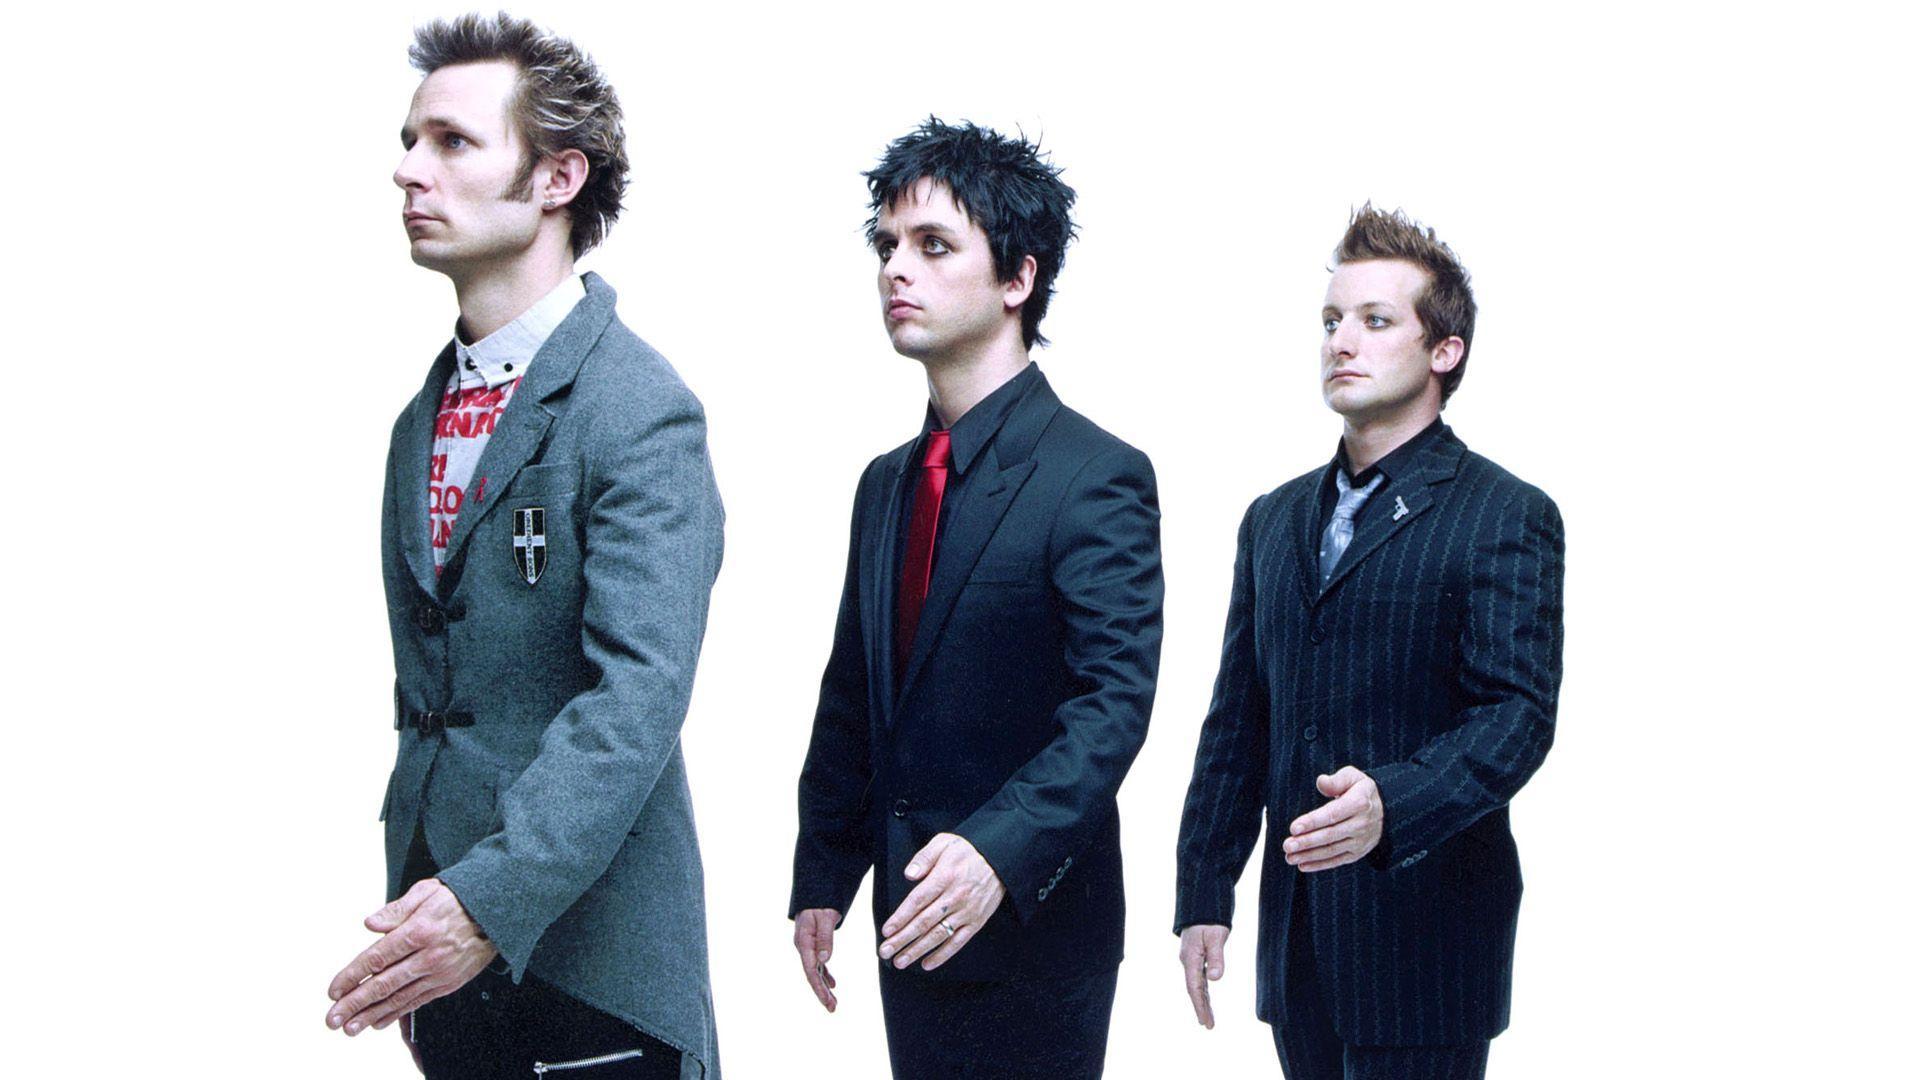 Music Green Day Wallpapers 1920x1080 px Free Download